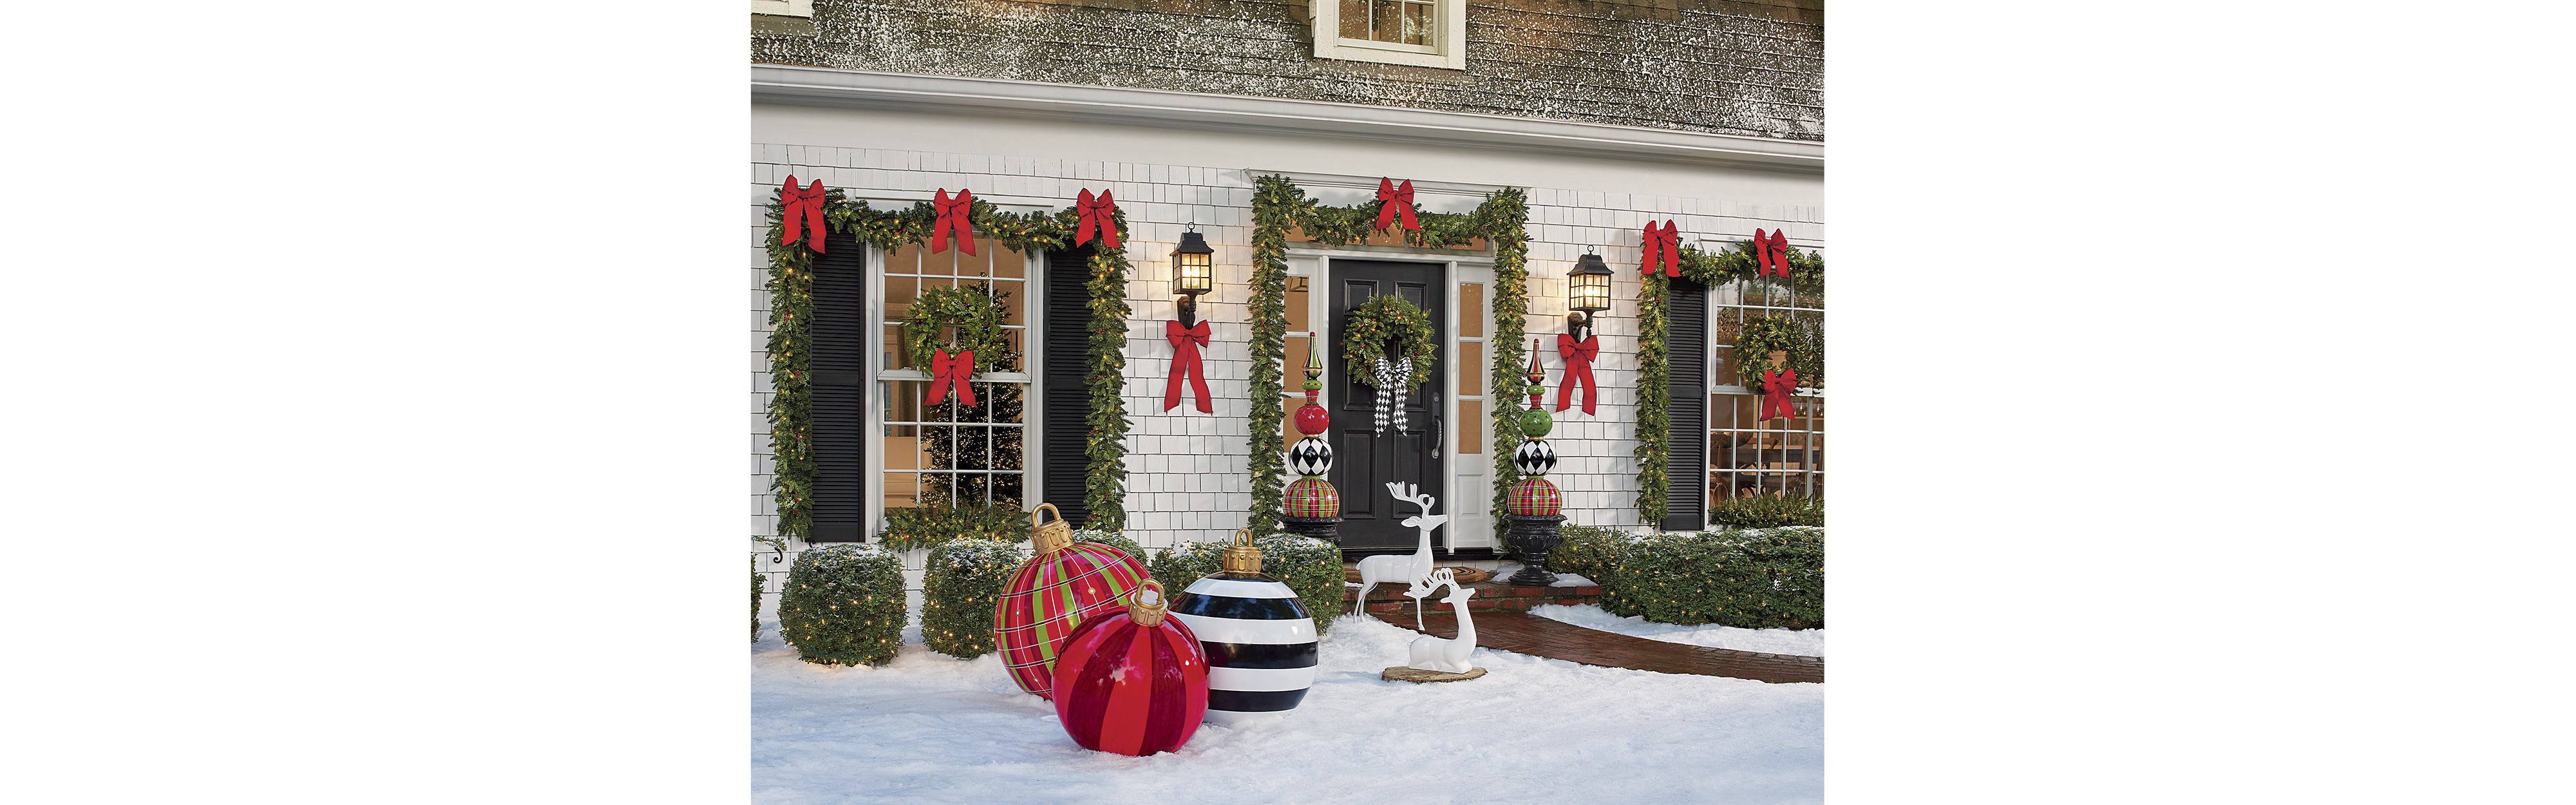 christmas-porch-decorations-15-holly-jolly-looks-grandin-road-blog